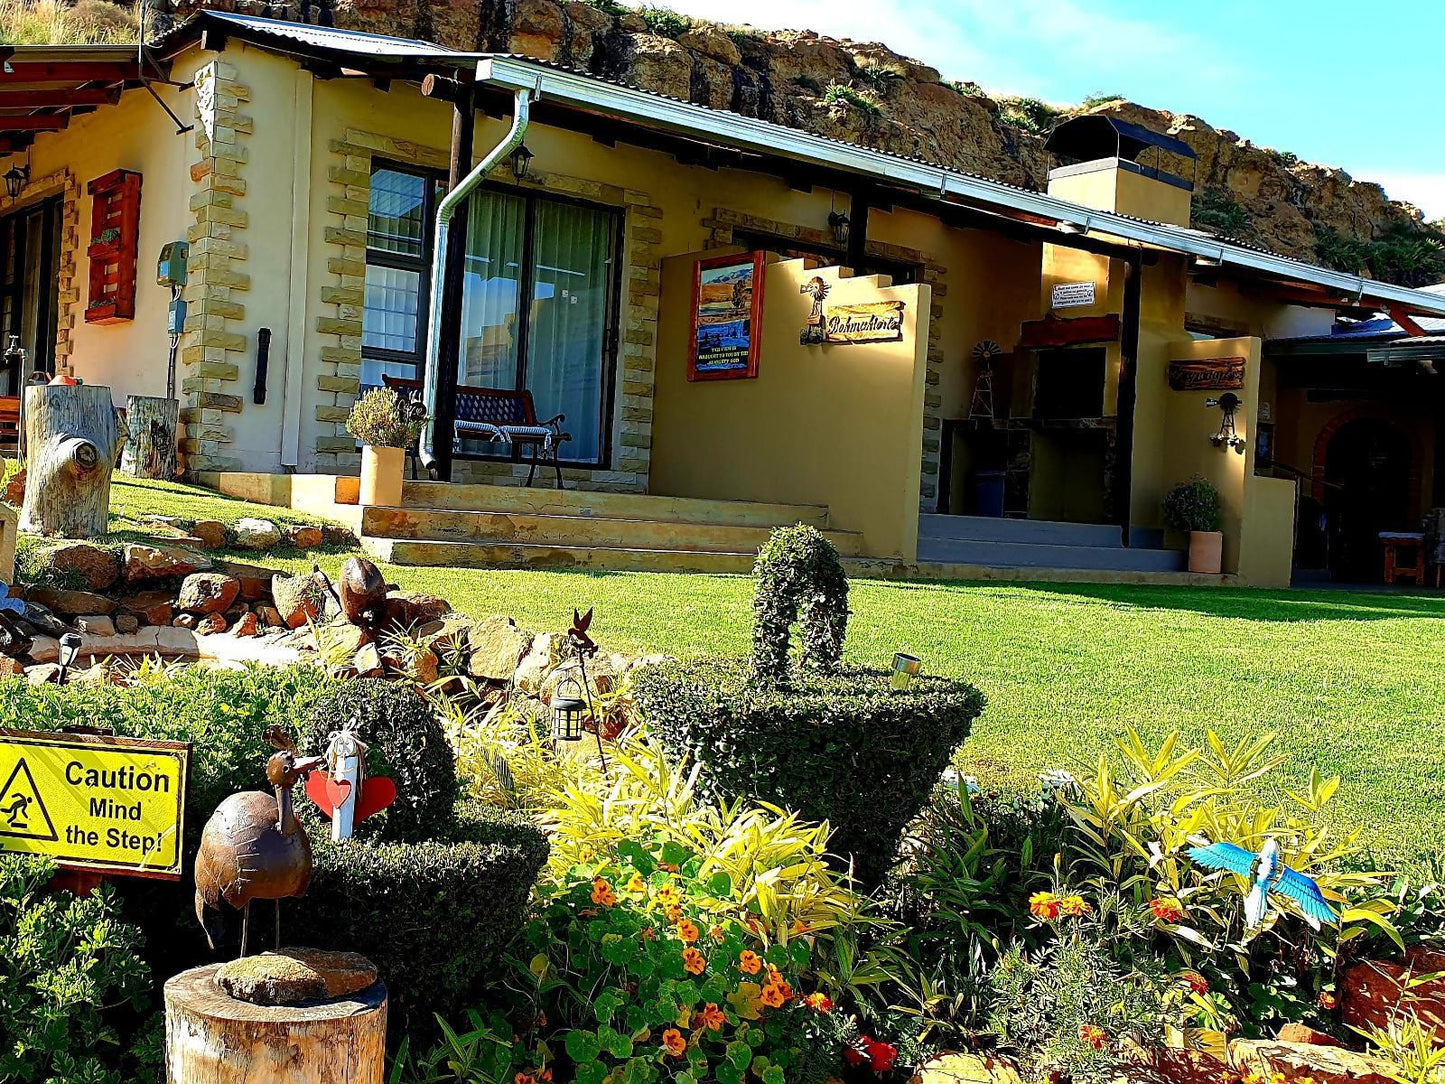 Thaba Lapeng Mountain Escape Clarens Free State South Africa House, Building, Architecture